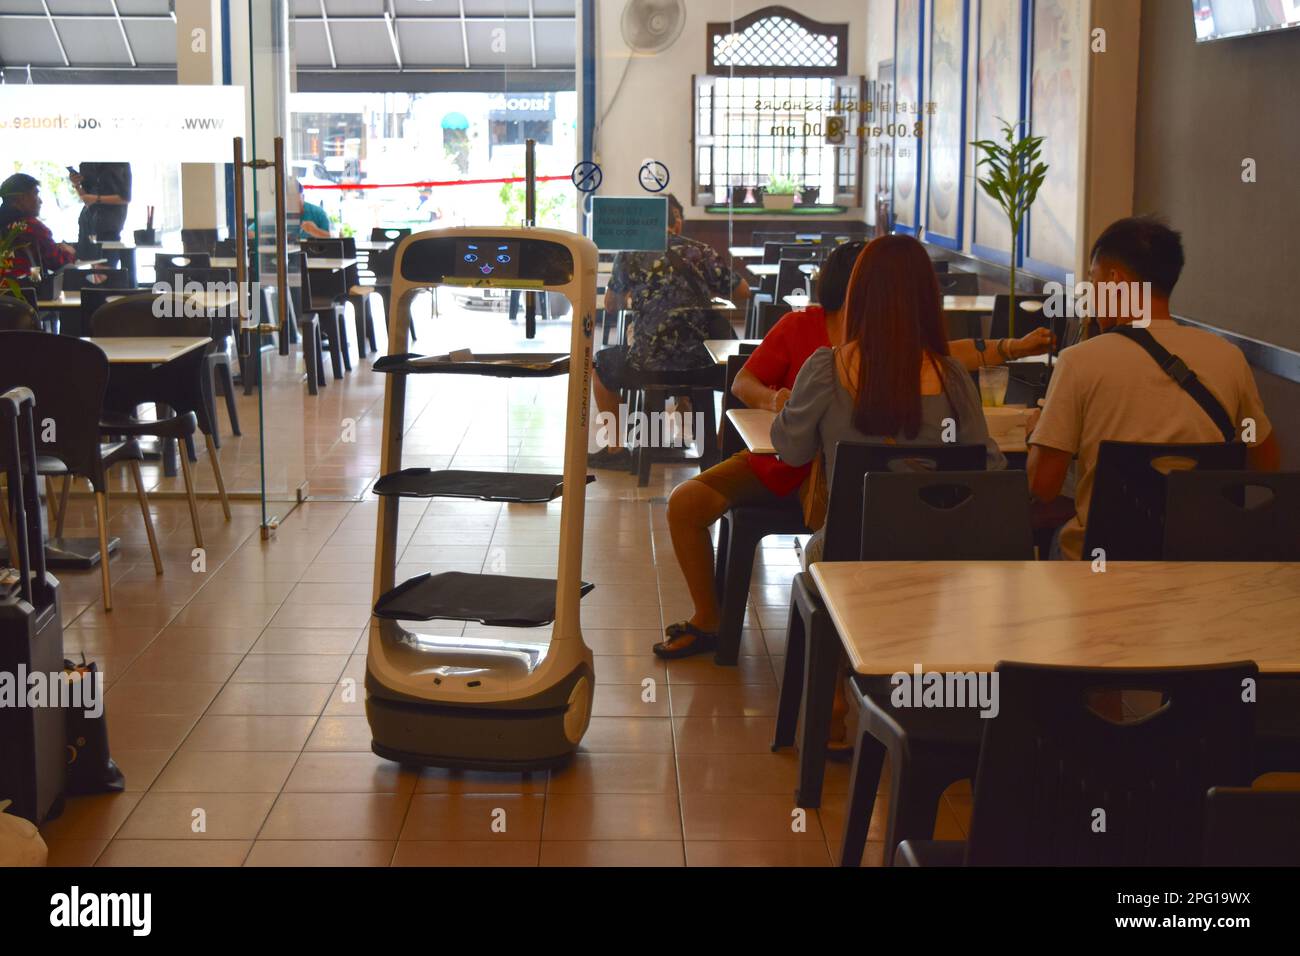 Robot waiter is serving food in cafe in Penang. Stock Photo